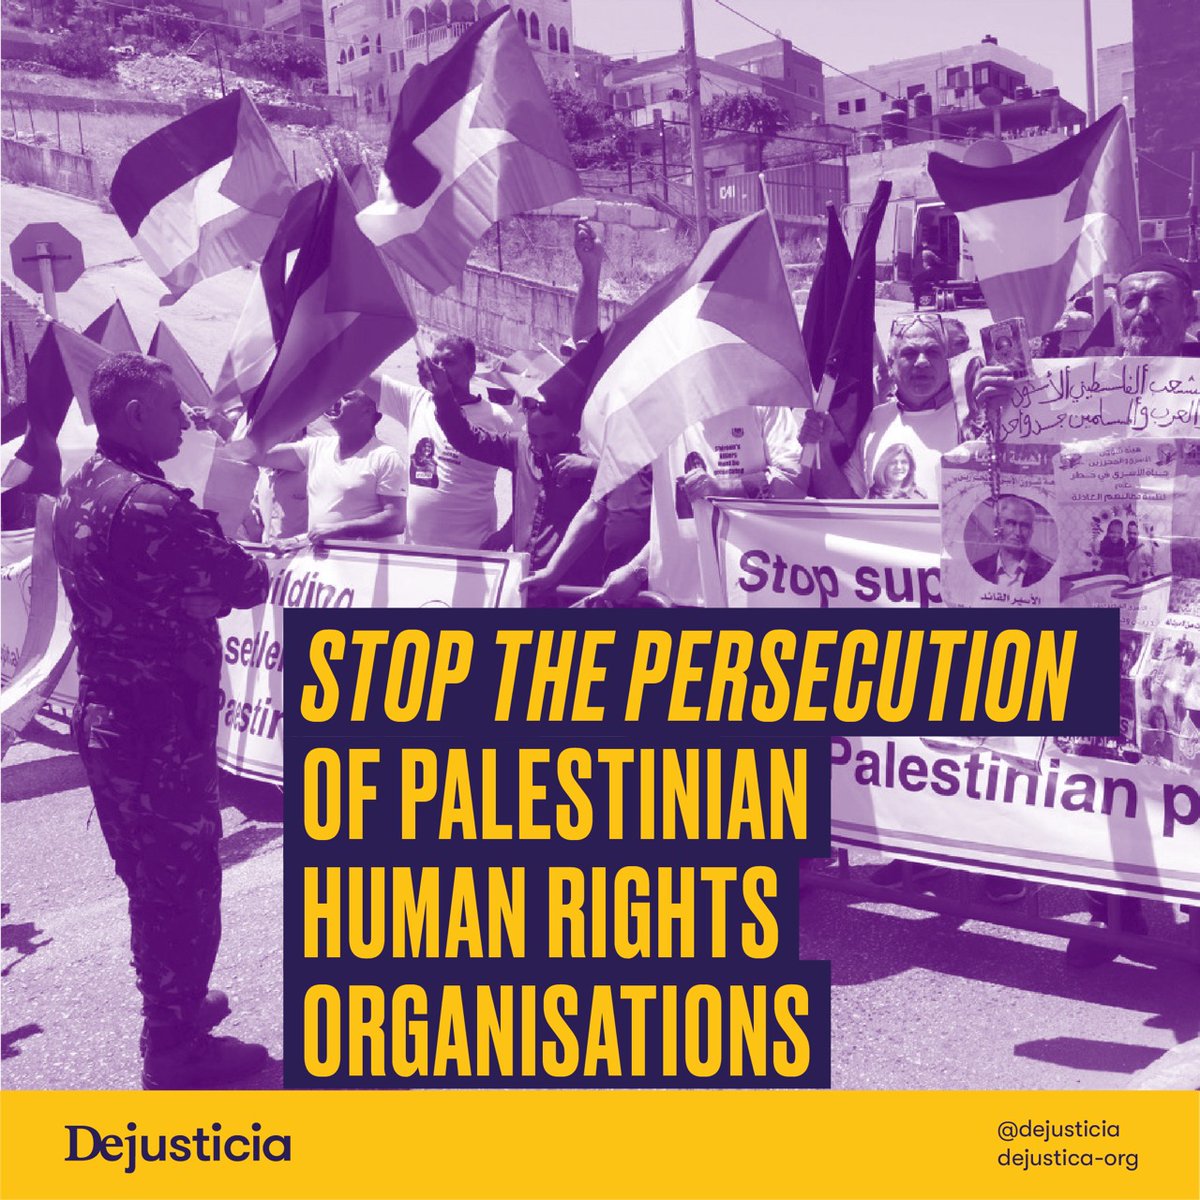 We condemn the use of anti-terrorism laws by the Israeli government to target, criminalize and incarcerate human rights defenders.